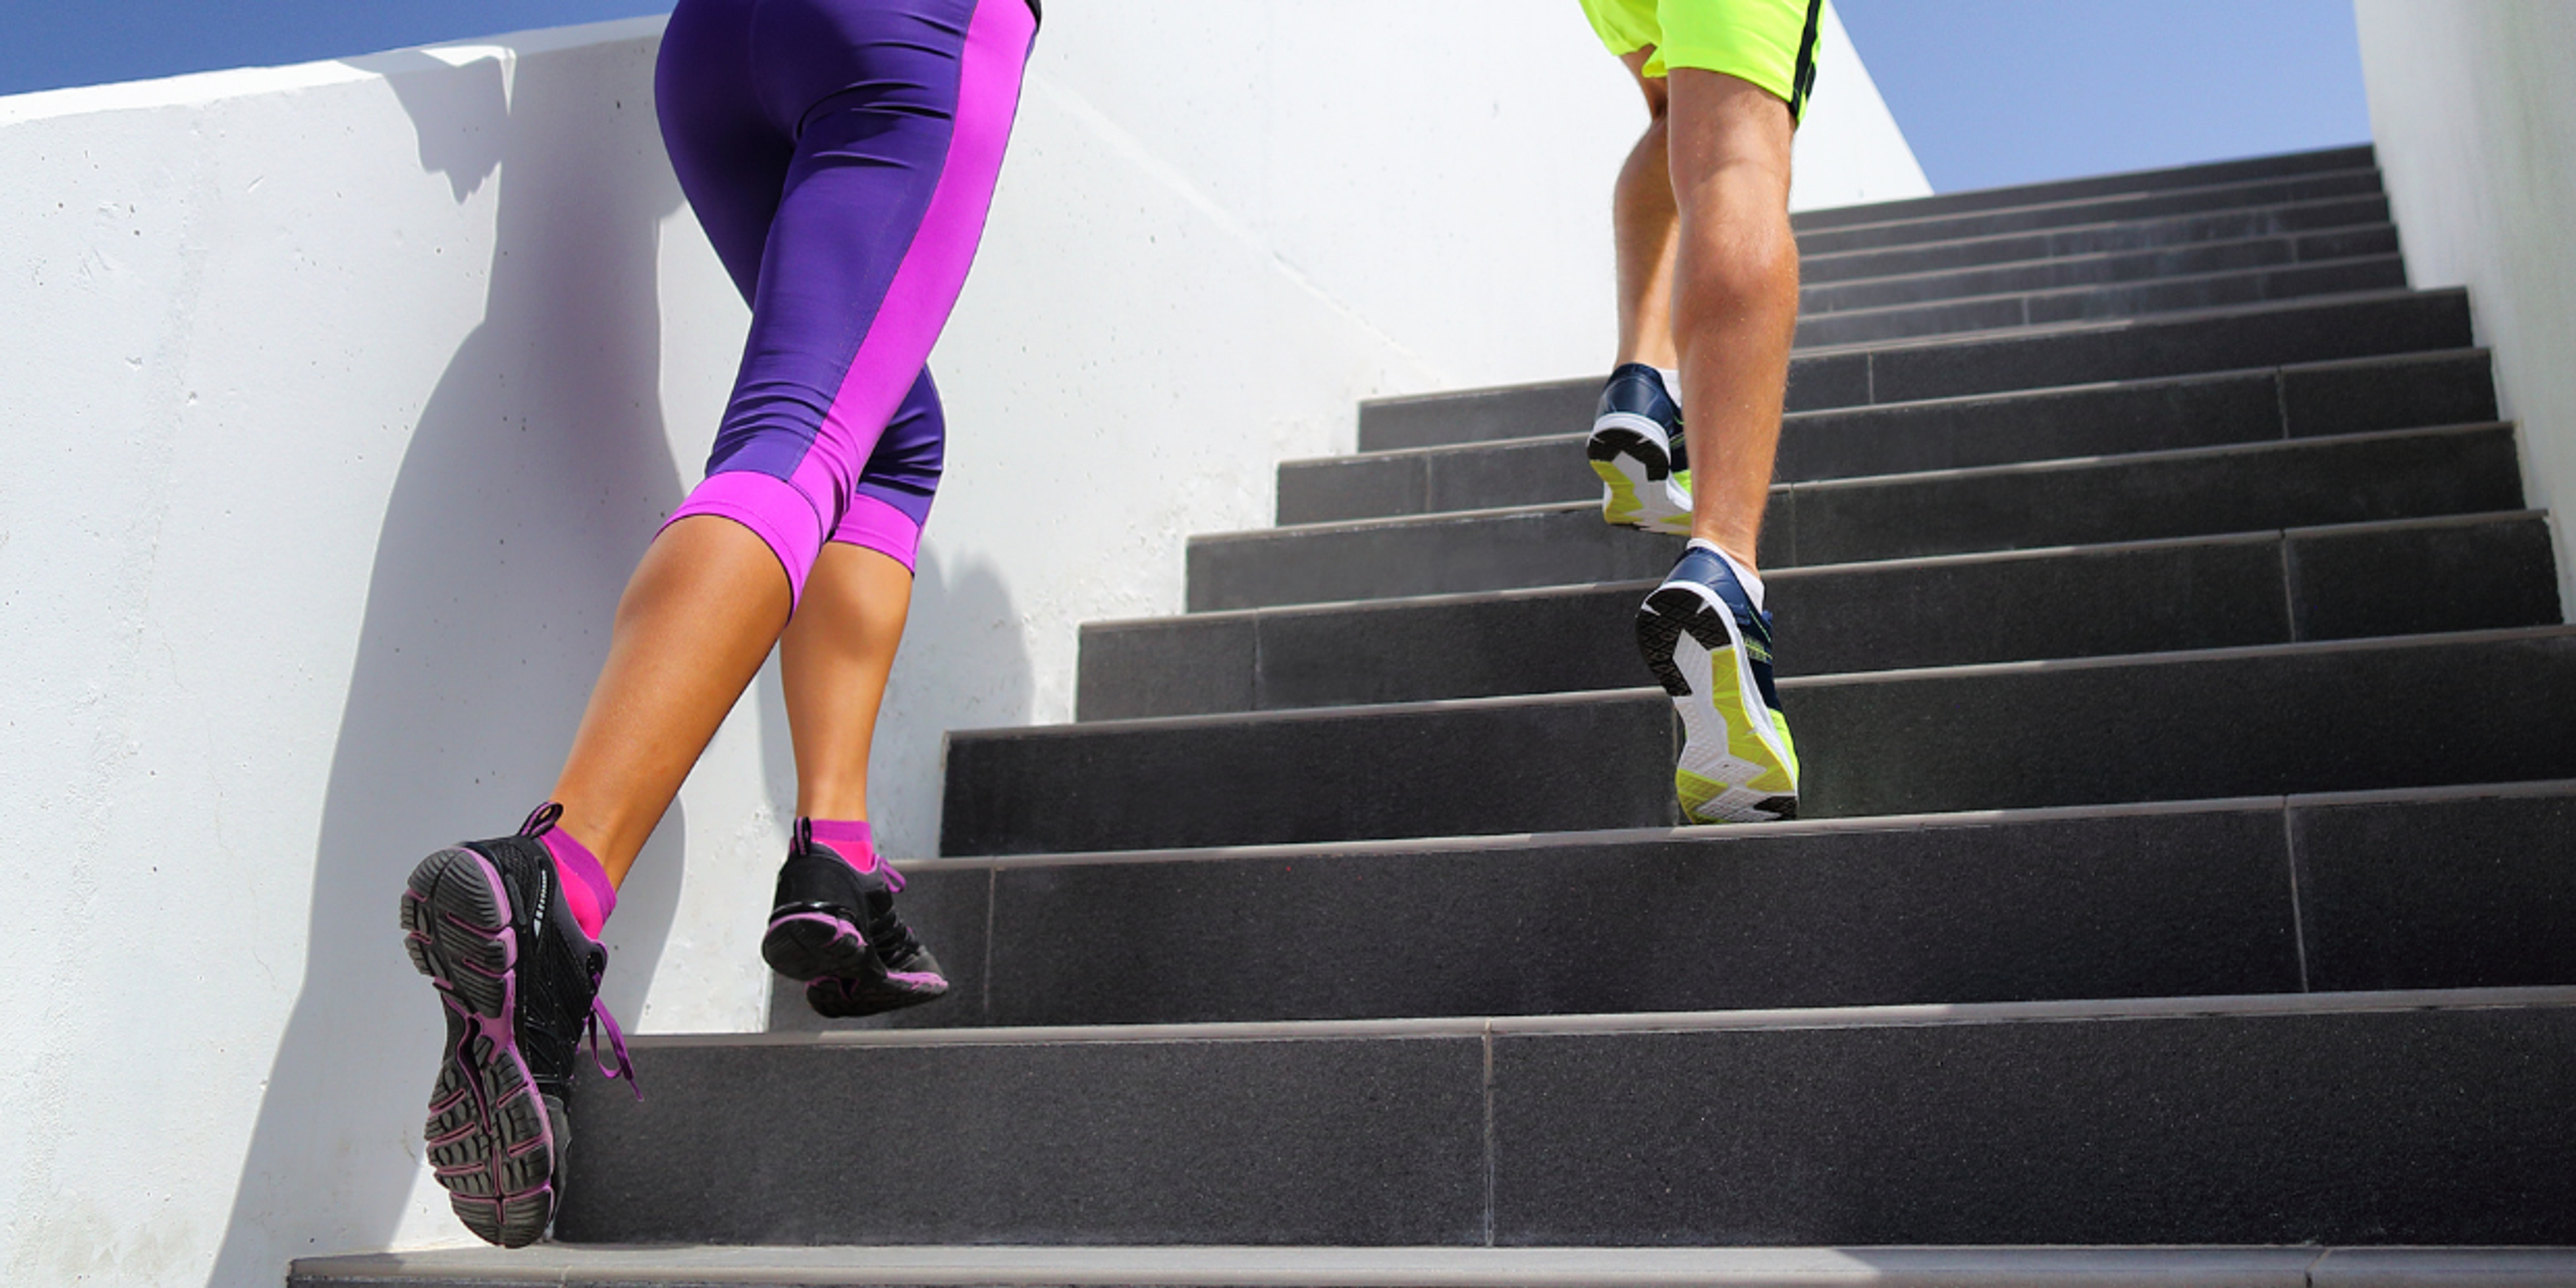 Avoiding stairs or hills is one way to help your knee rest and recover.